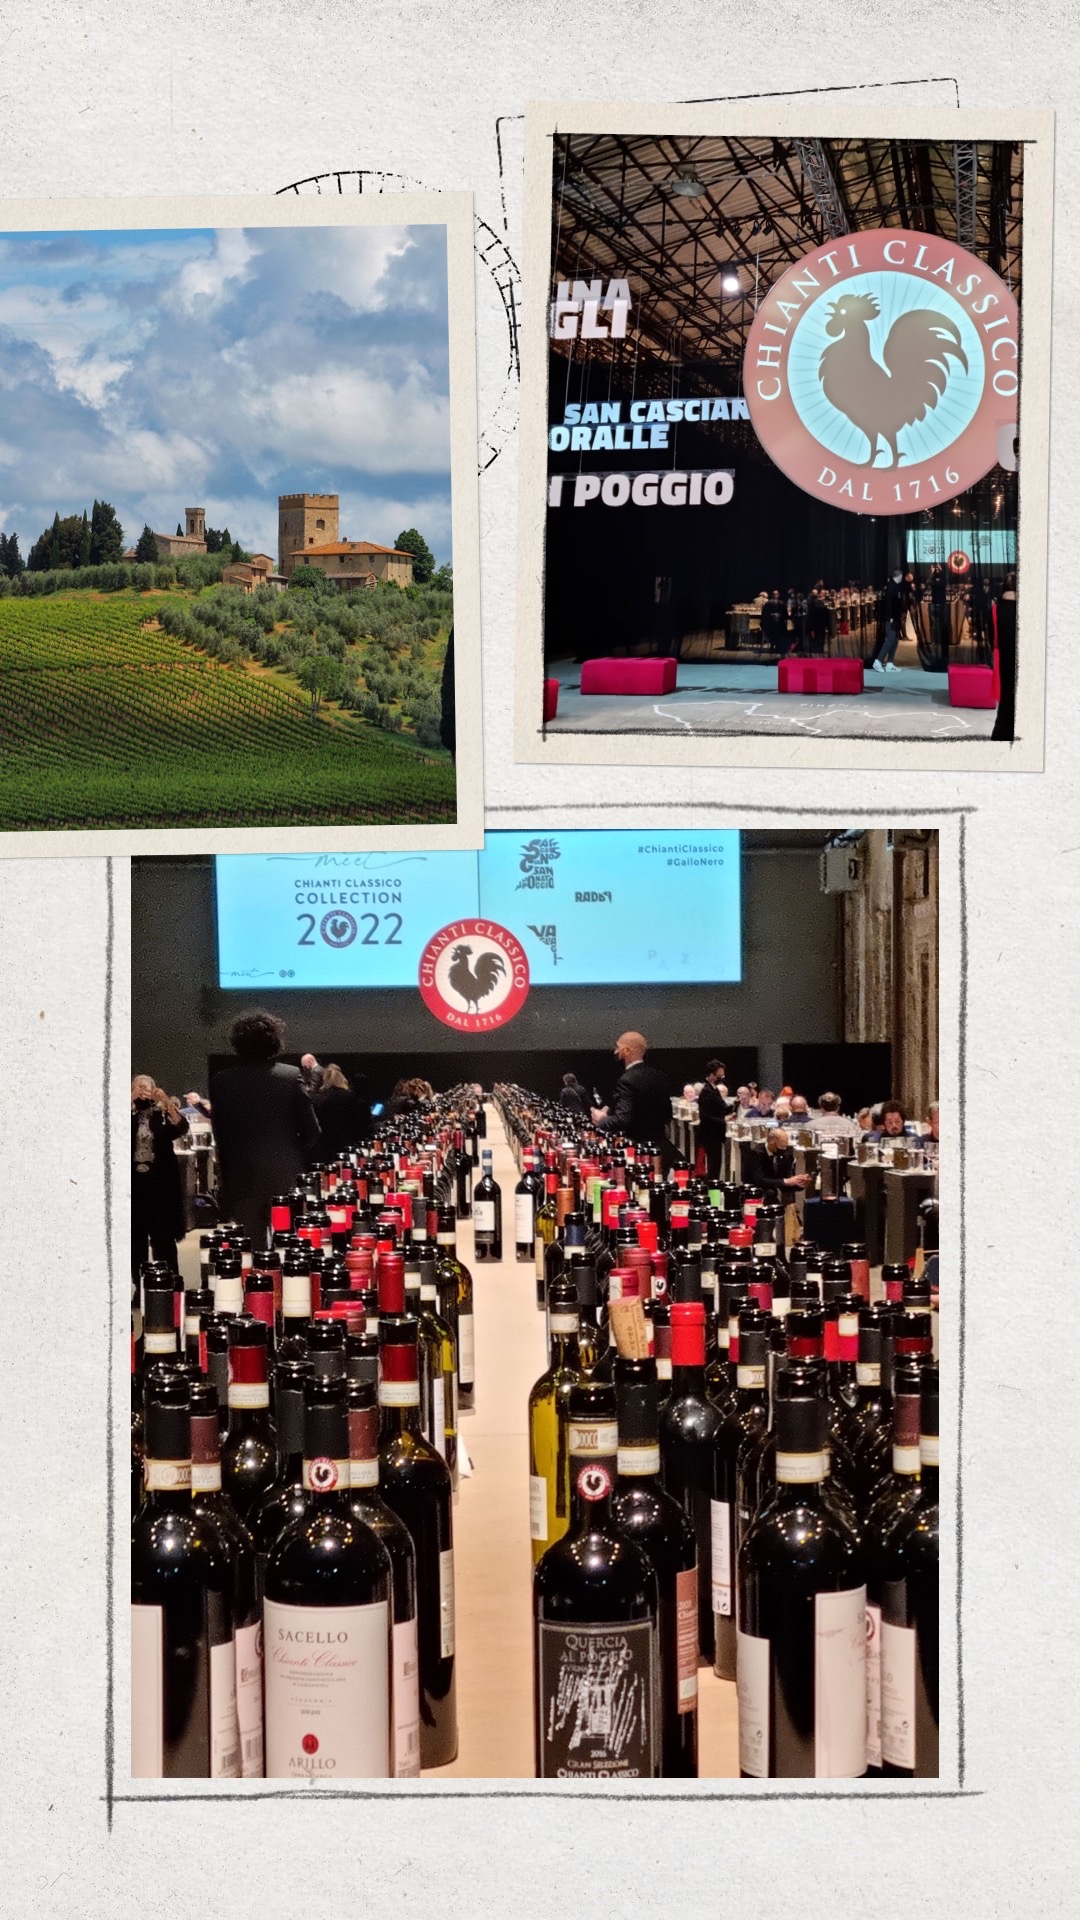 CHIANTI CLASSICO COLLECTION, AN ASSESSMENT OF ONE OF THE OF MOST CHARMING WINE TERRITORIES IN ITALY  – FILIPPO MAGNANI